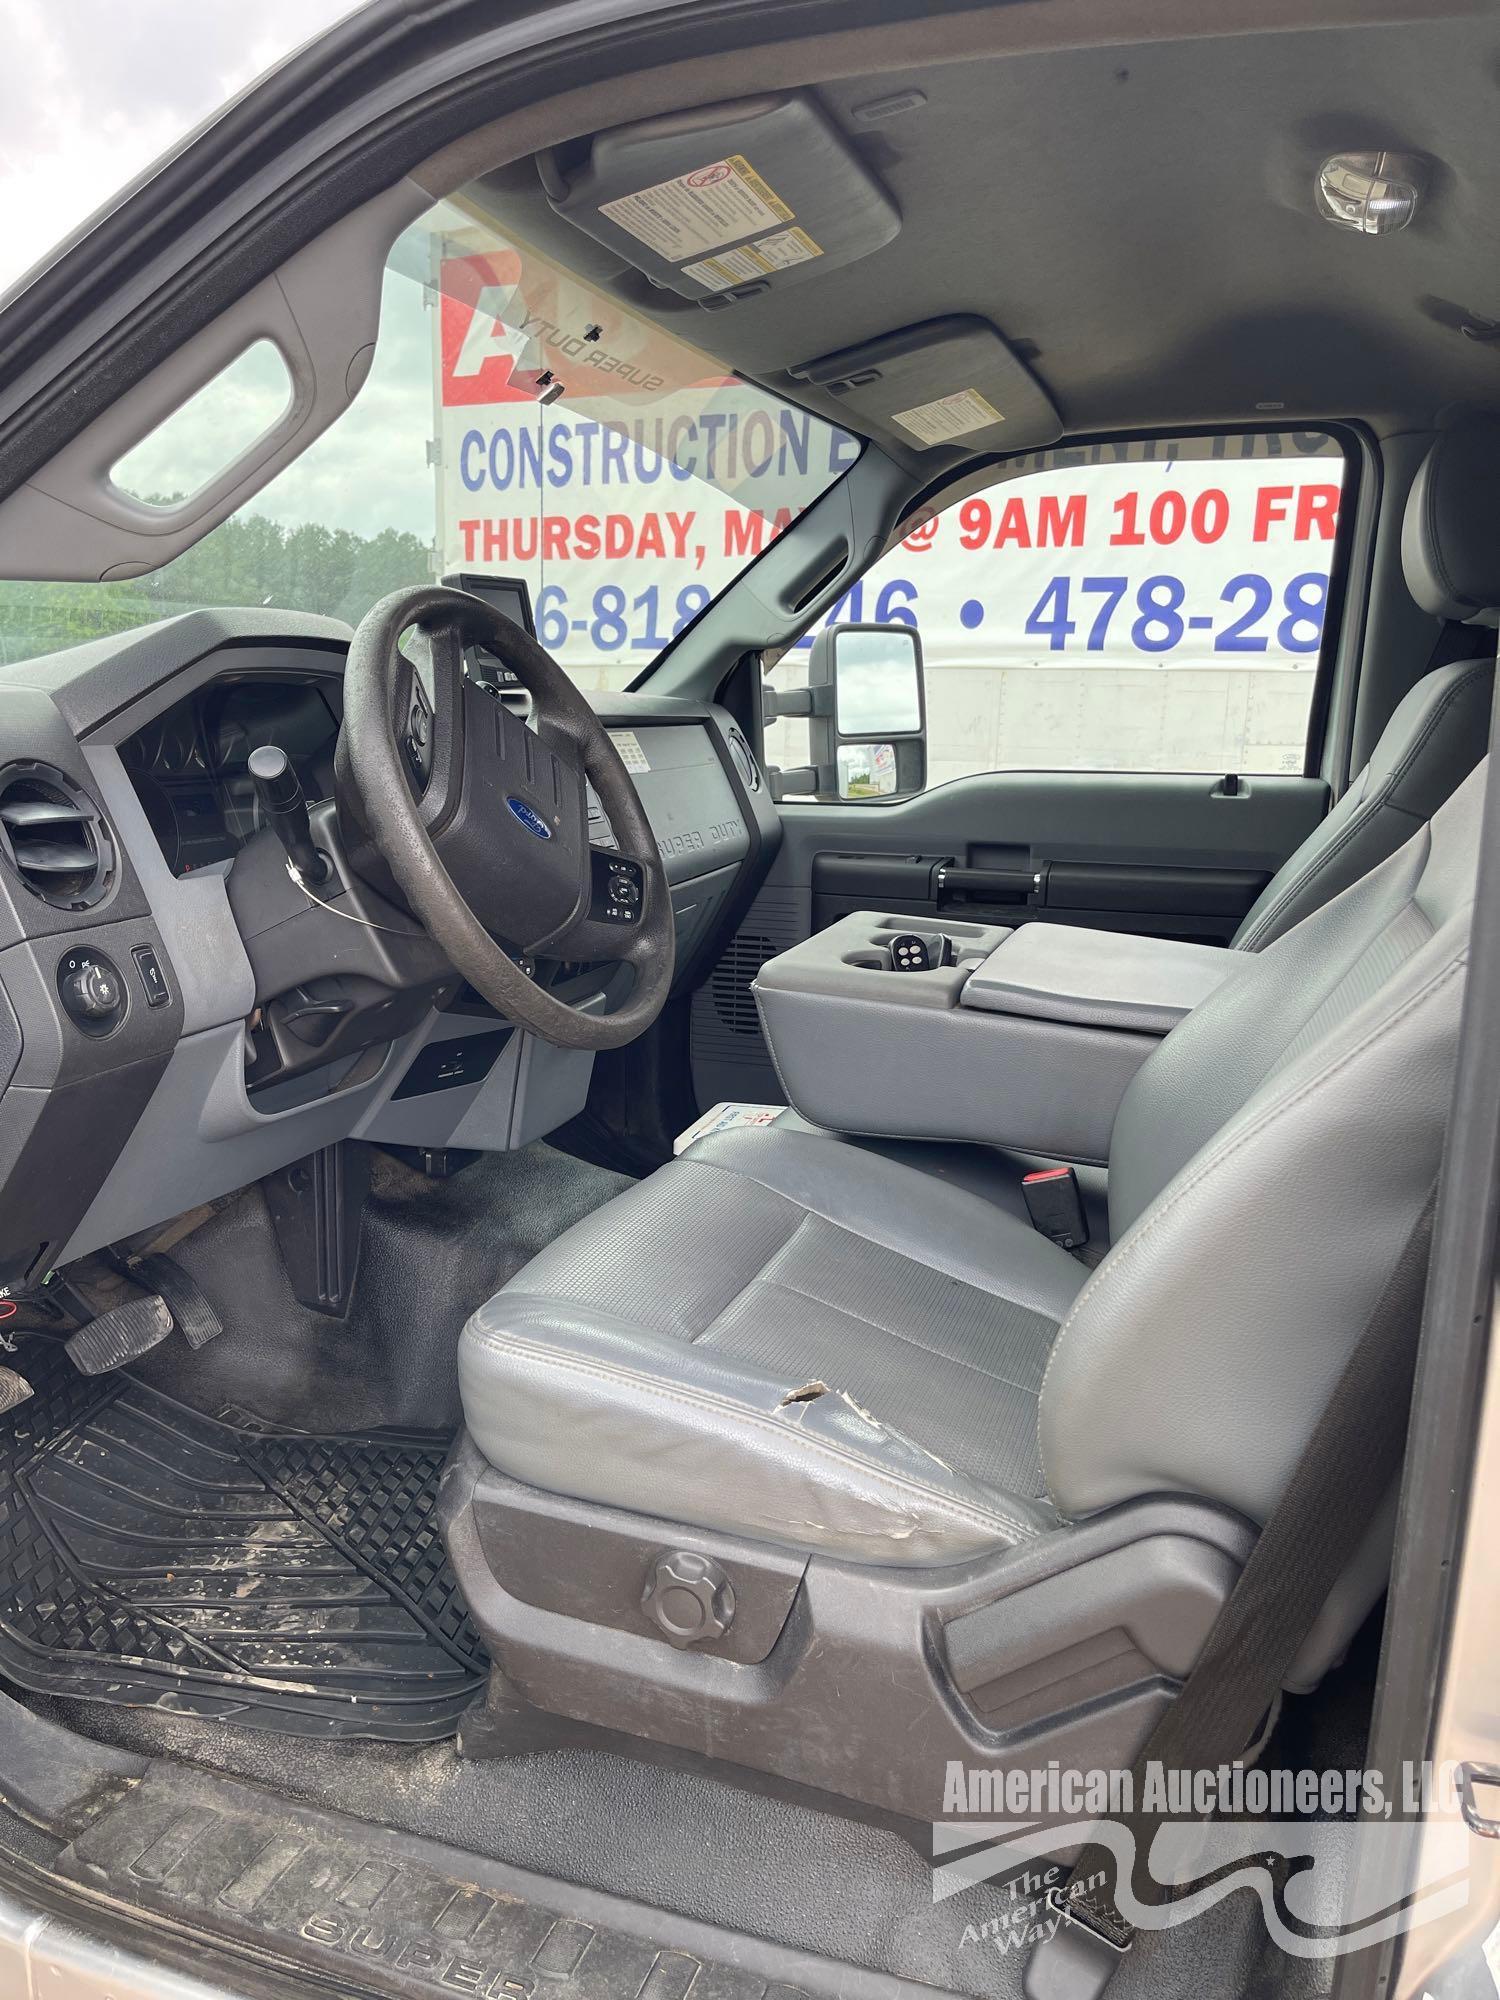 2015 Ford F-450 Service Truck